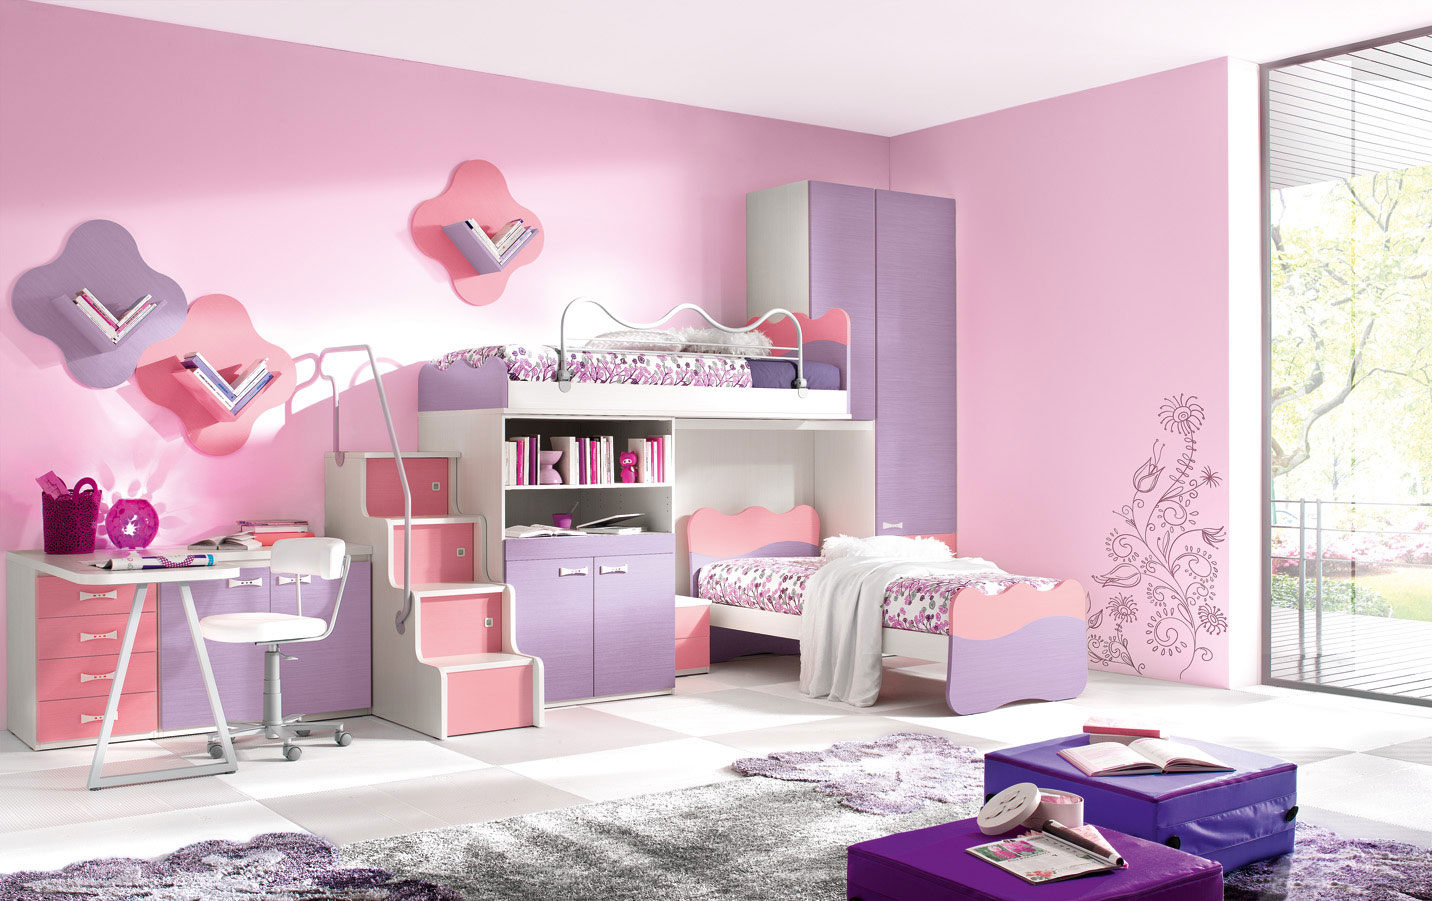 kid-bedroom-fetching-design-for-girl-bedroom-decoration-with-pink-bedroom-wall-along-with-pink-and-purple-bunk-bed-and-purple-wardrobe-fascinating-design-for-girl-bedroom-decoration